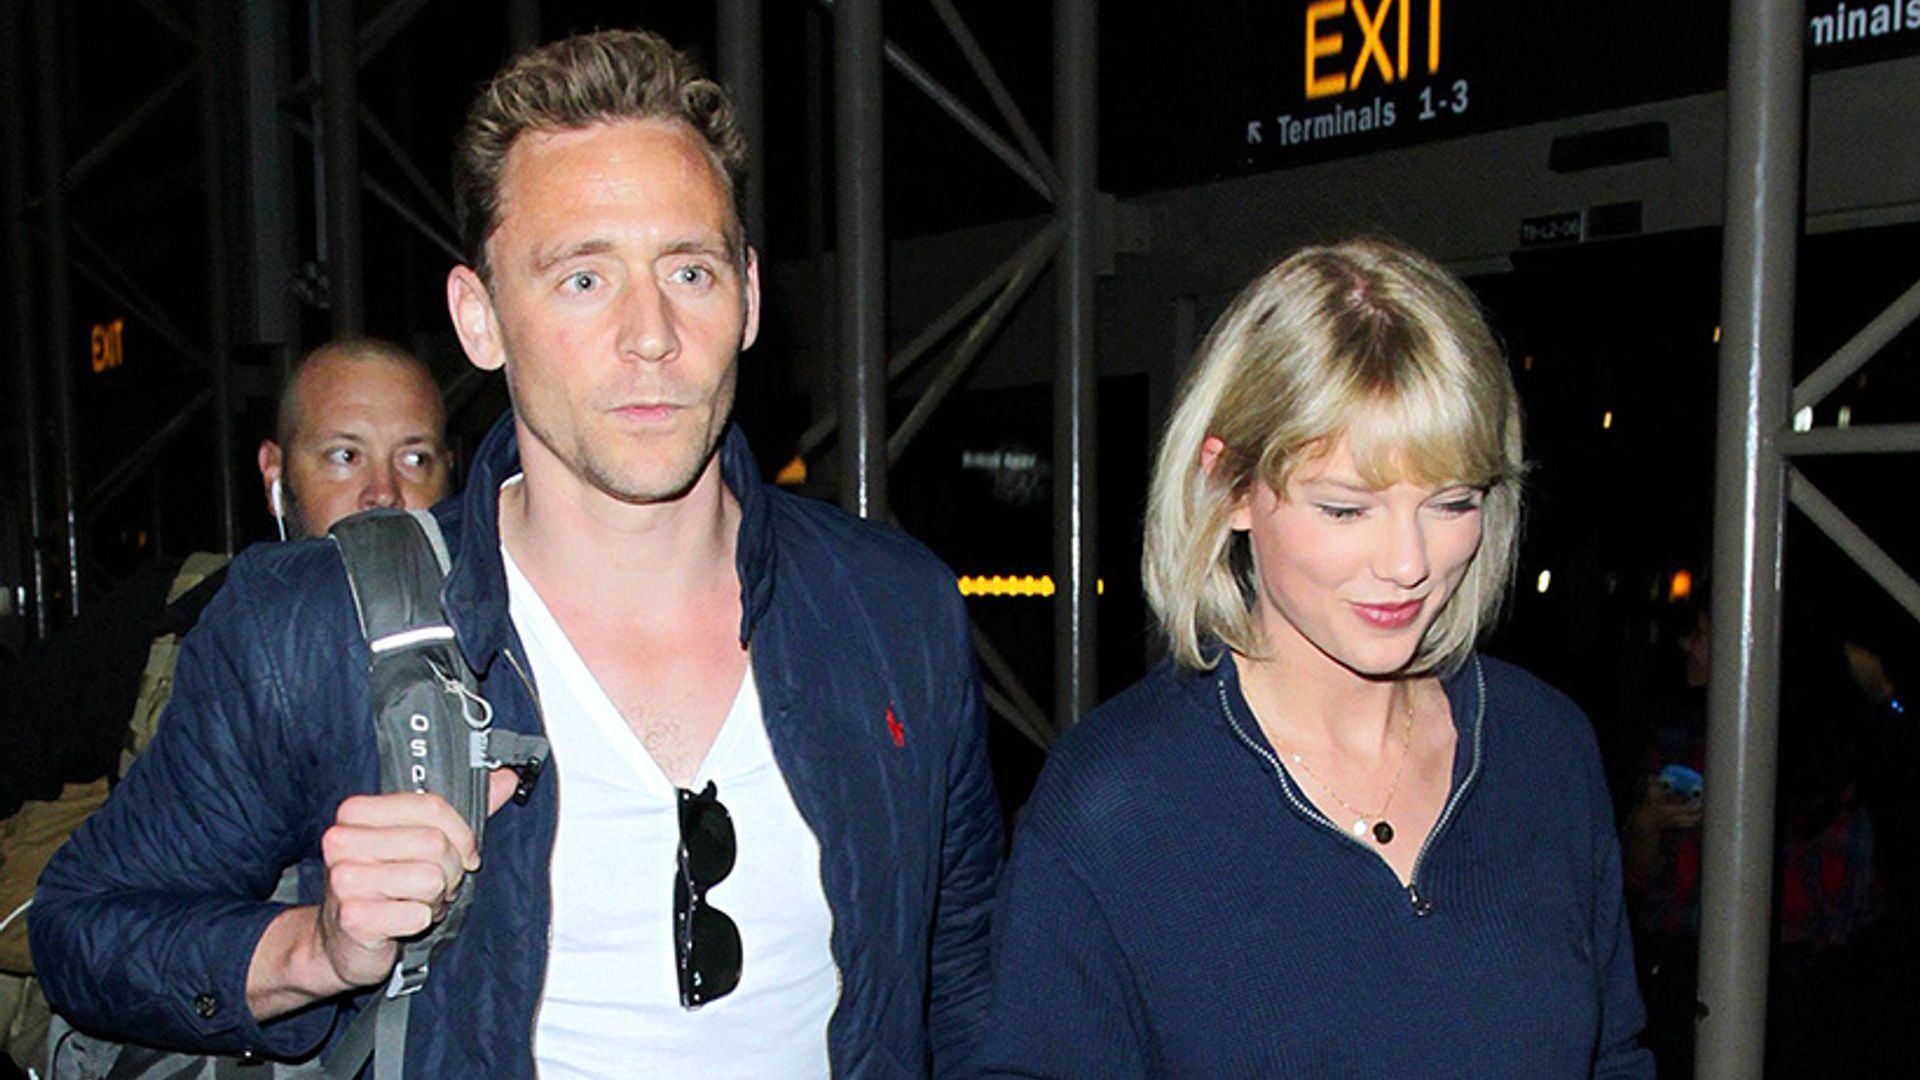 Taylor Swift Tom Hiddleston Age Difference